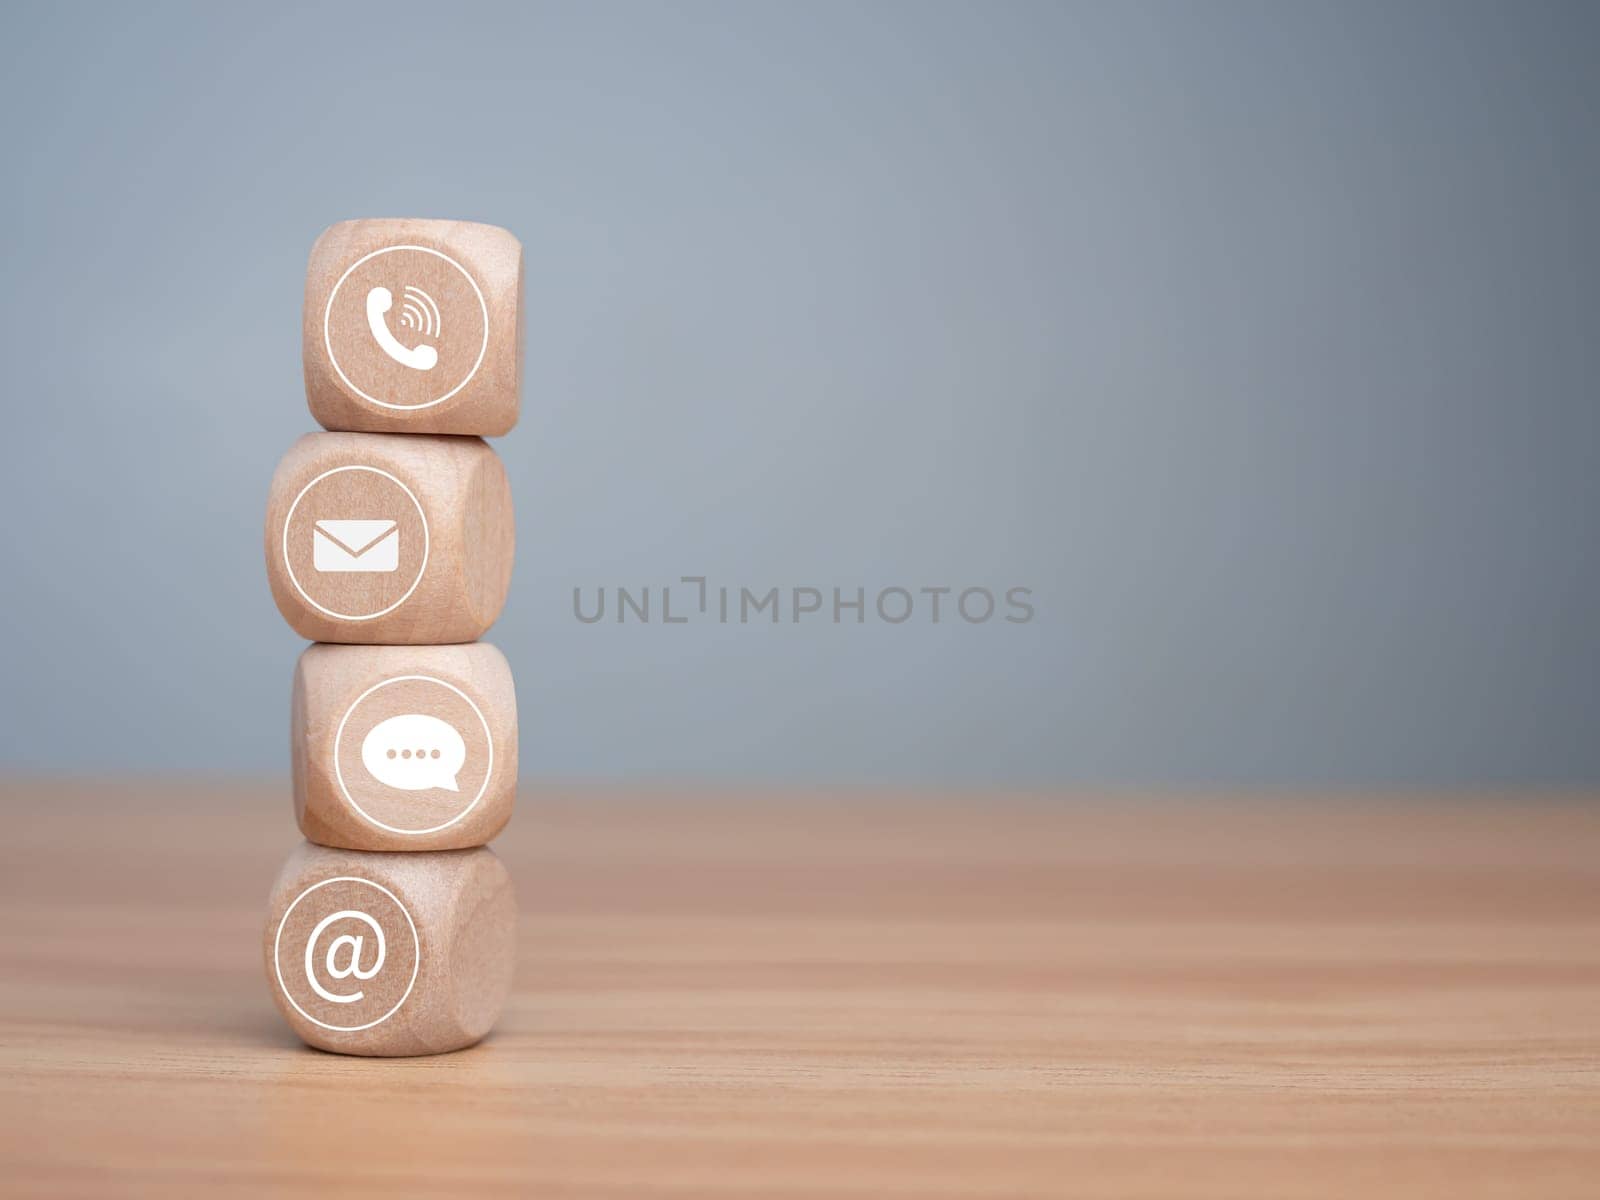 Website page contact us or e-mail marketing concept, Customer support hotline Contact us people connection. phone, email, address and chat message icon on wooden blocks, marketing online concept. by Unimages2527